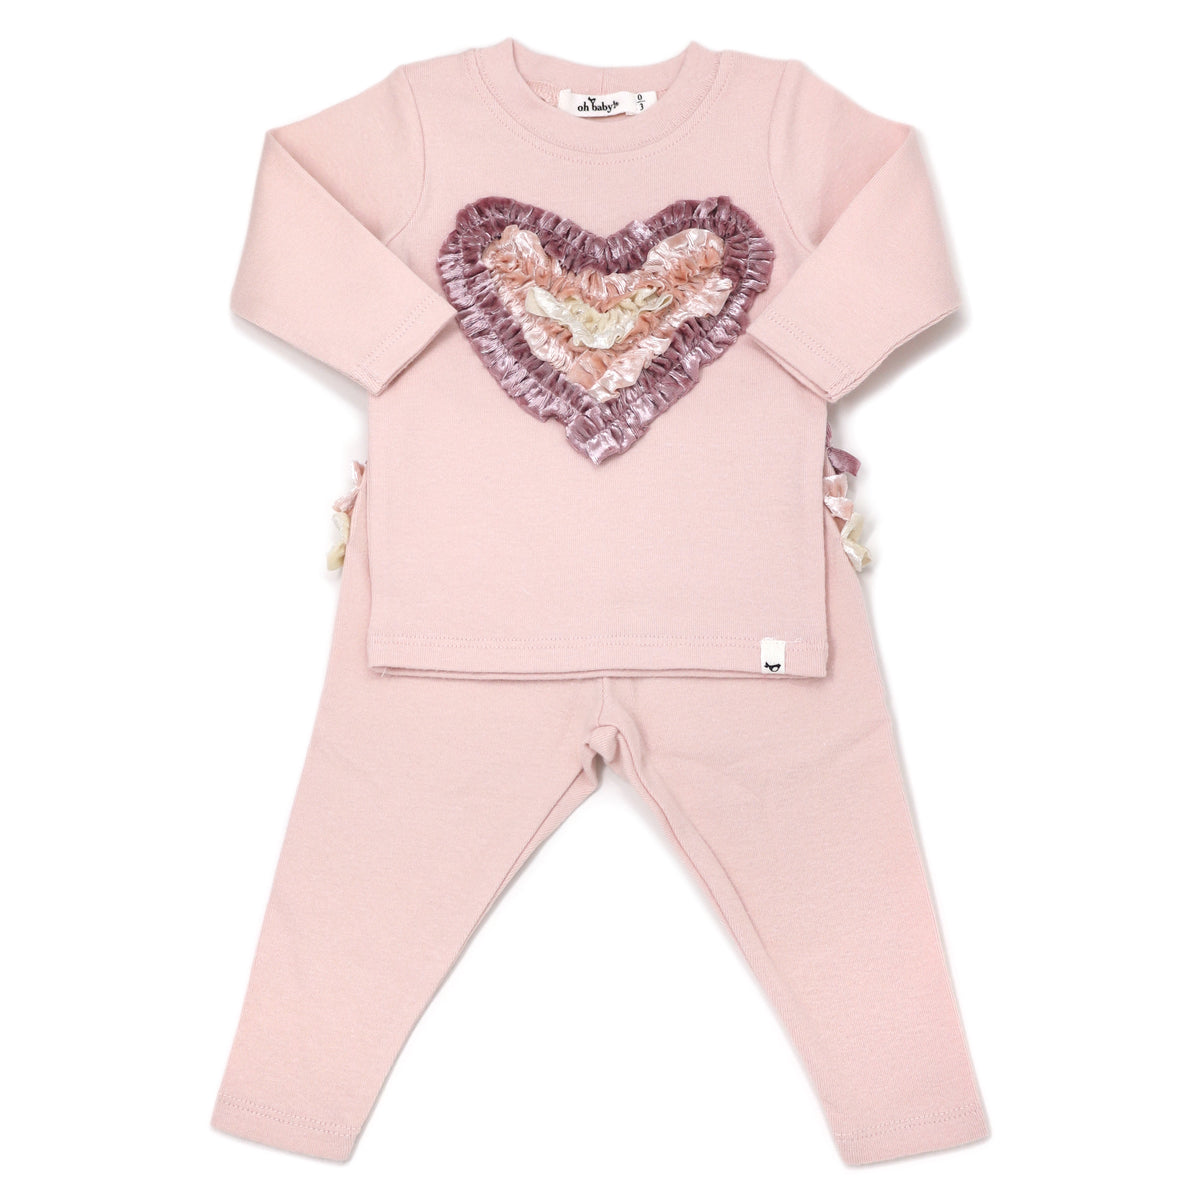 oh baby! Two Piece Set - Velvet Ruffle Heart Multi Color - Pale Pink